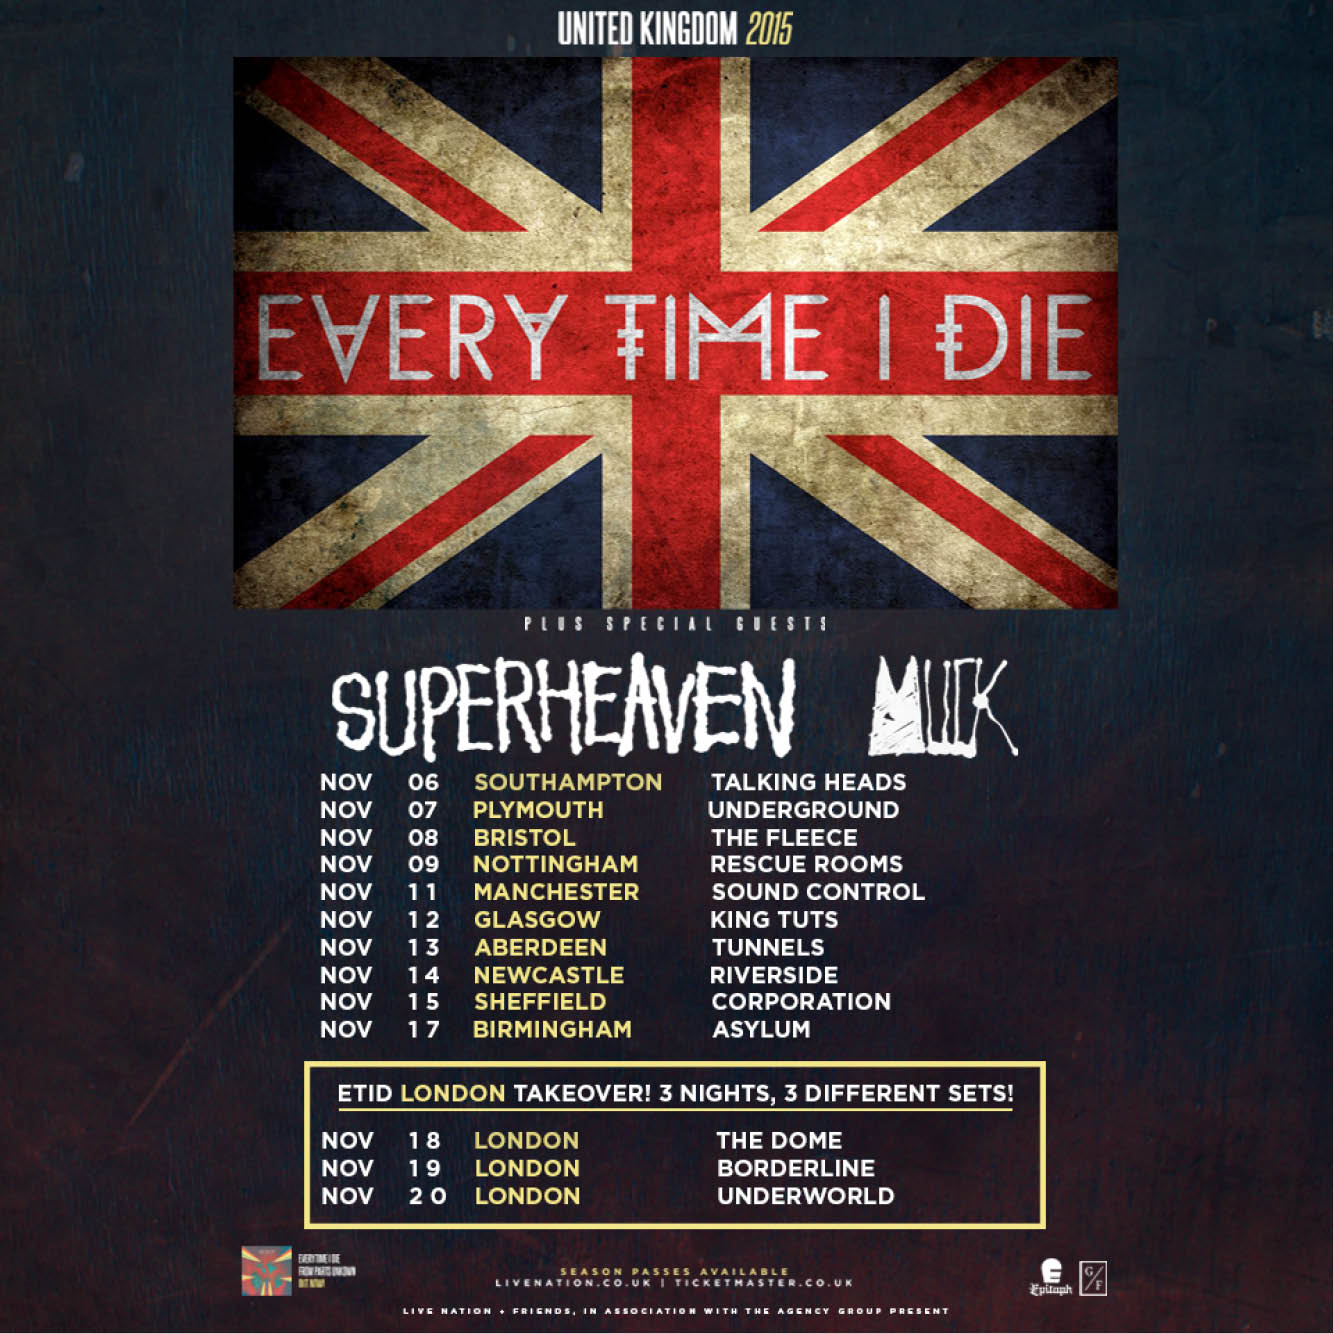 Every Time I Die 2015 UK tour